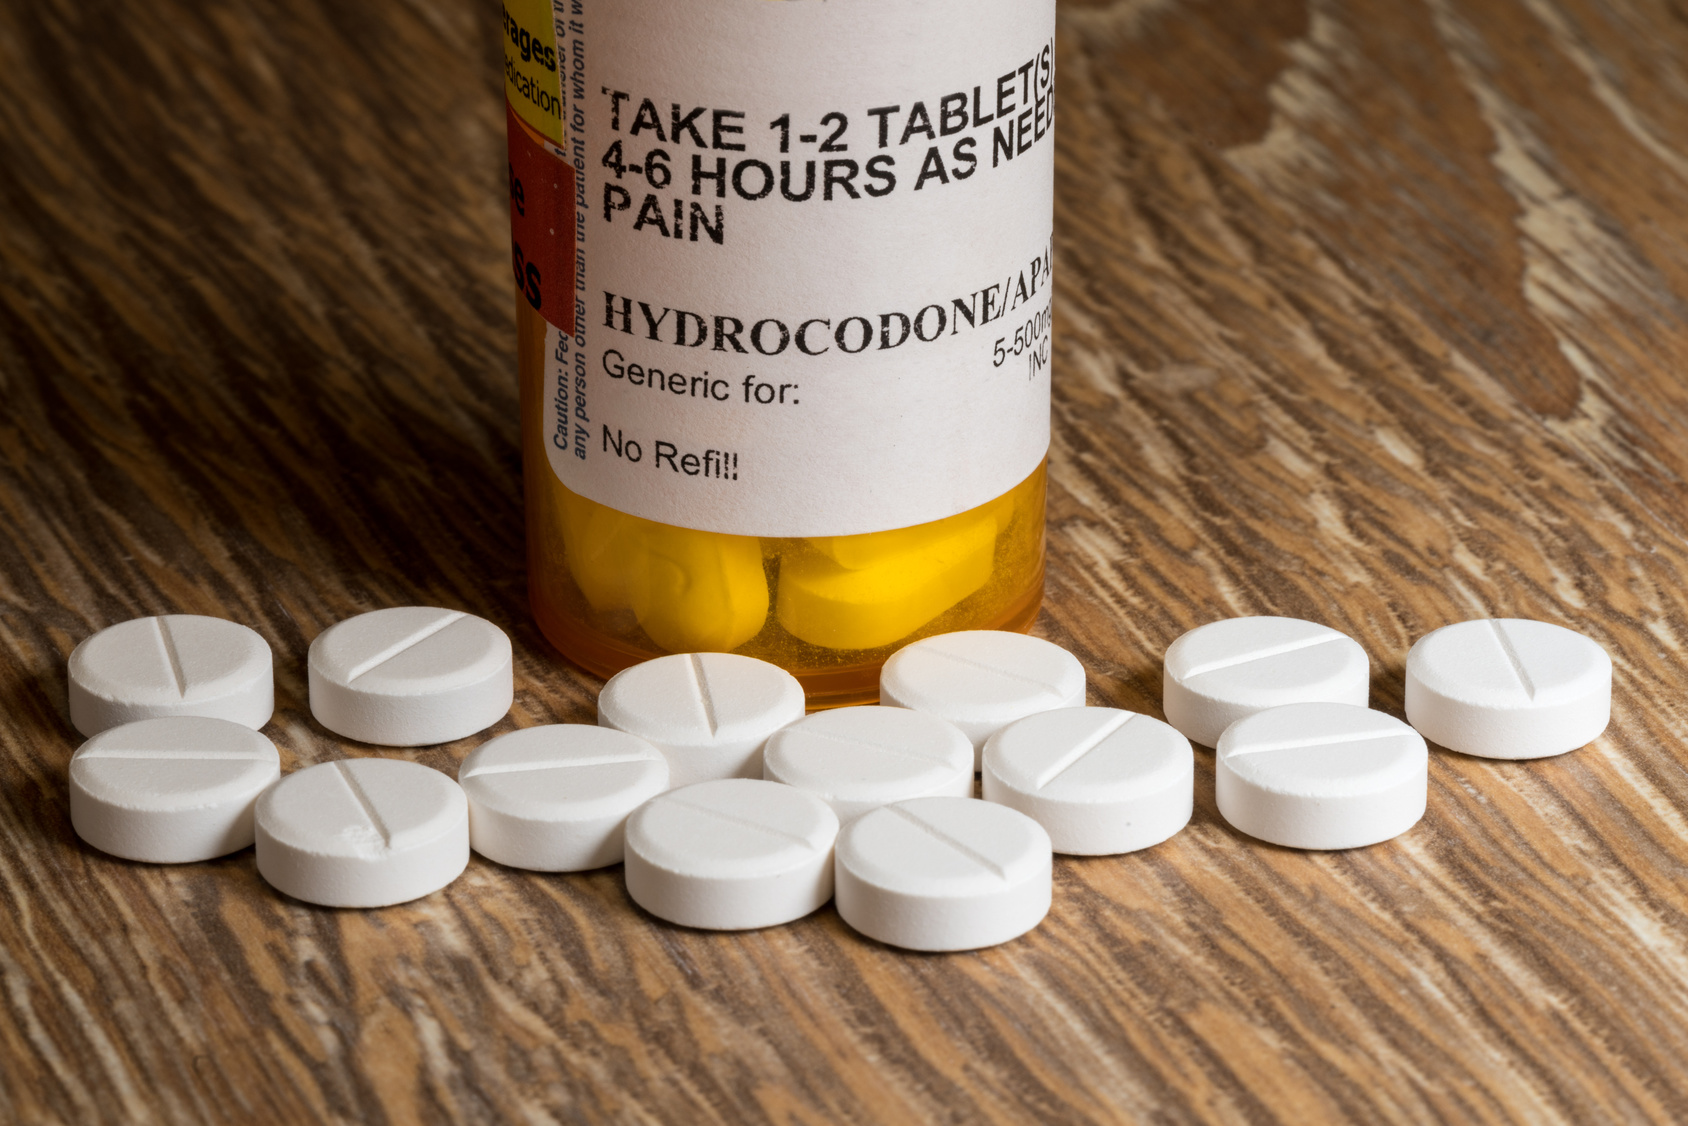 How Pharmacists Can Lead an Opioid Exit Plan